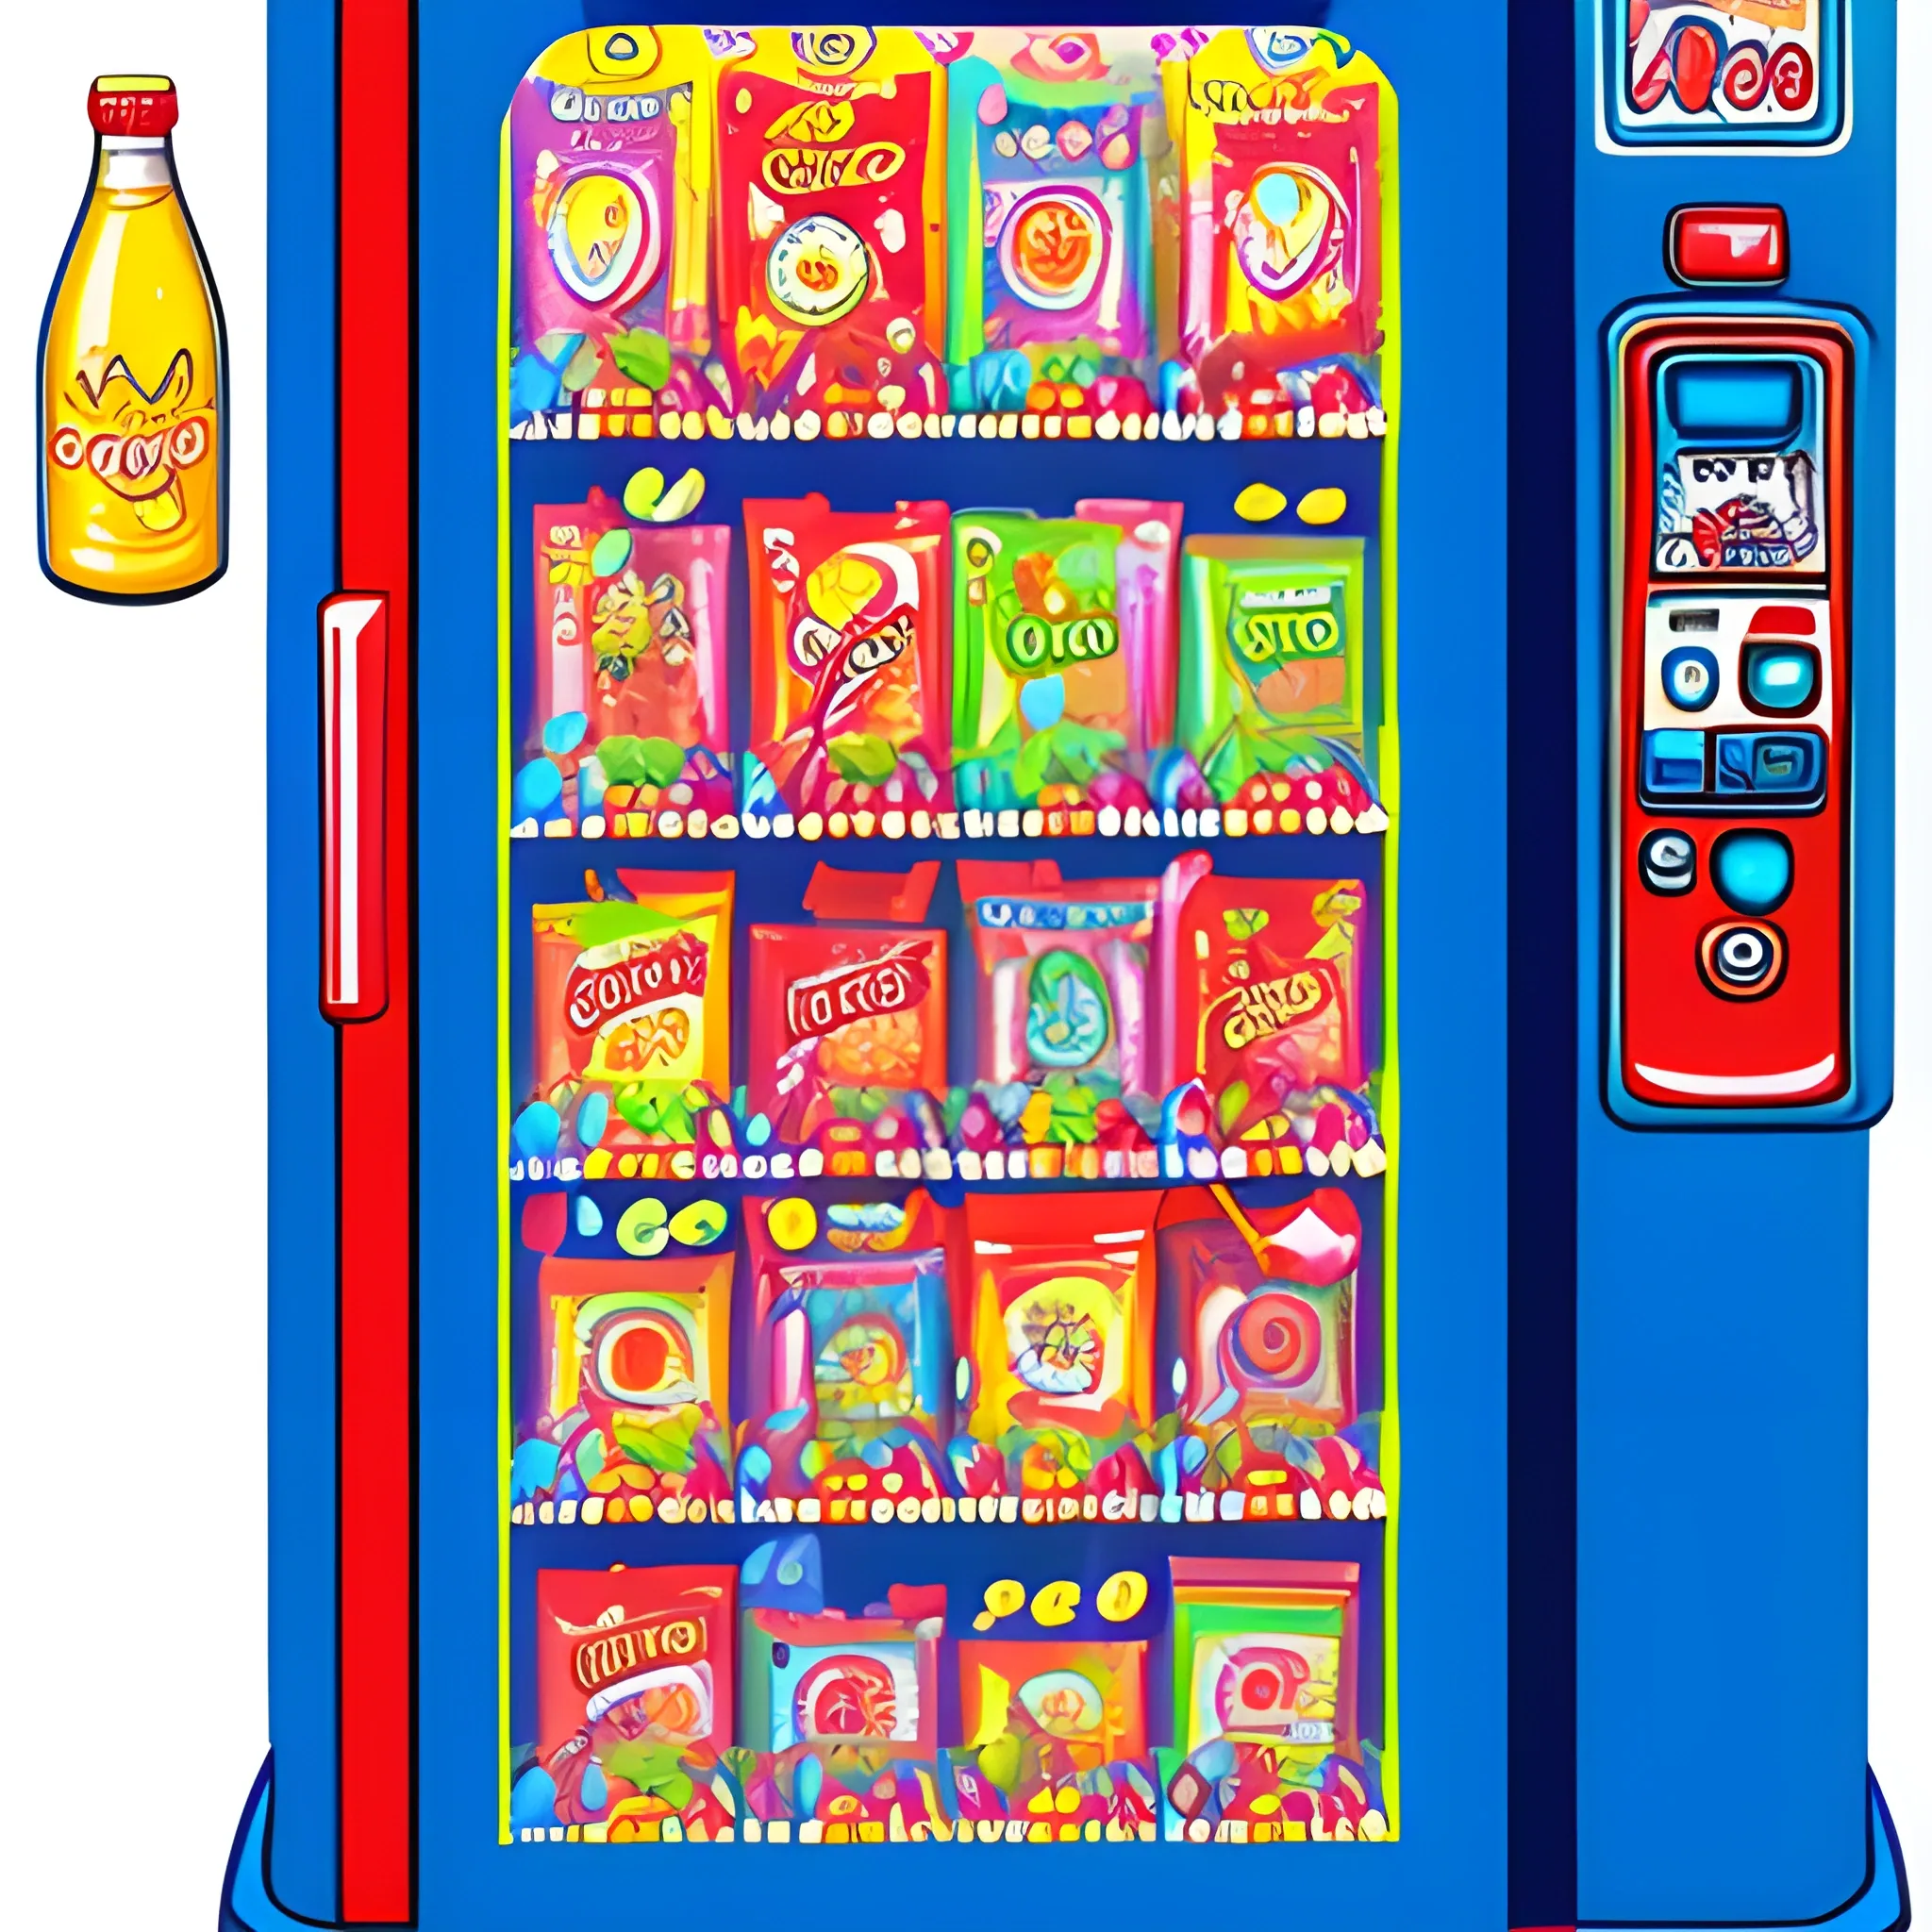 candy, beverage, toy vending machine in digital drawing style, with a close-up view